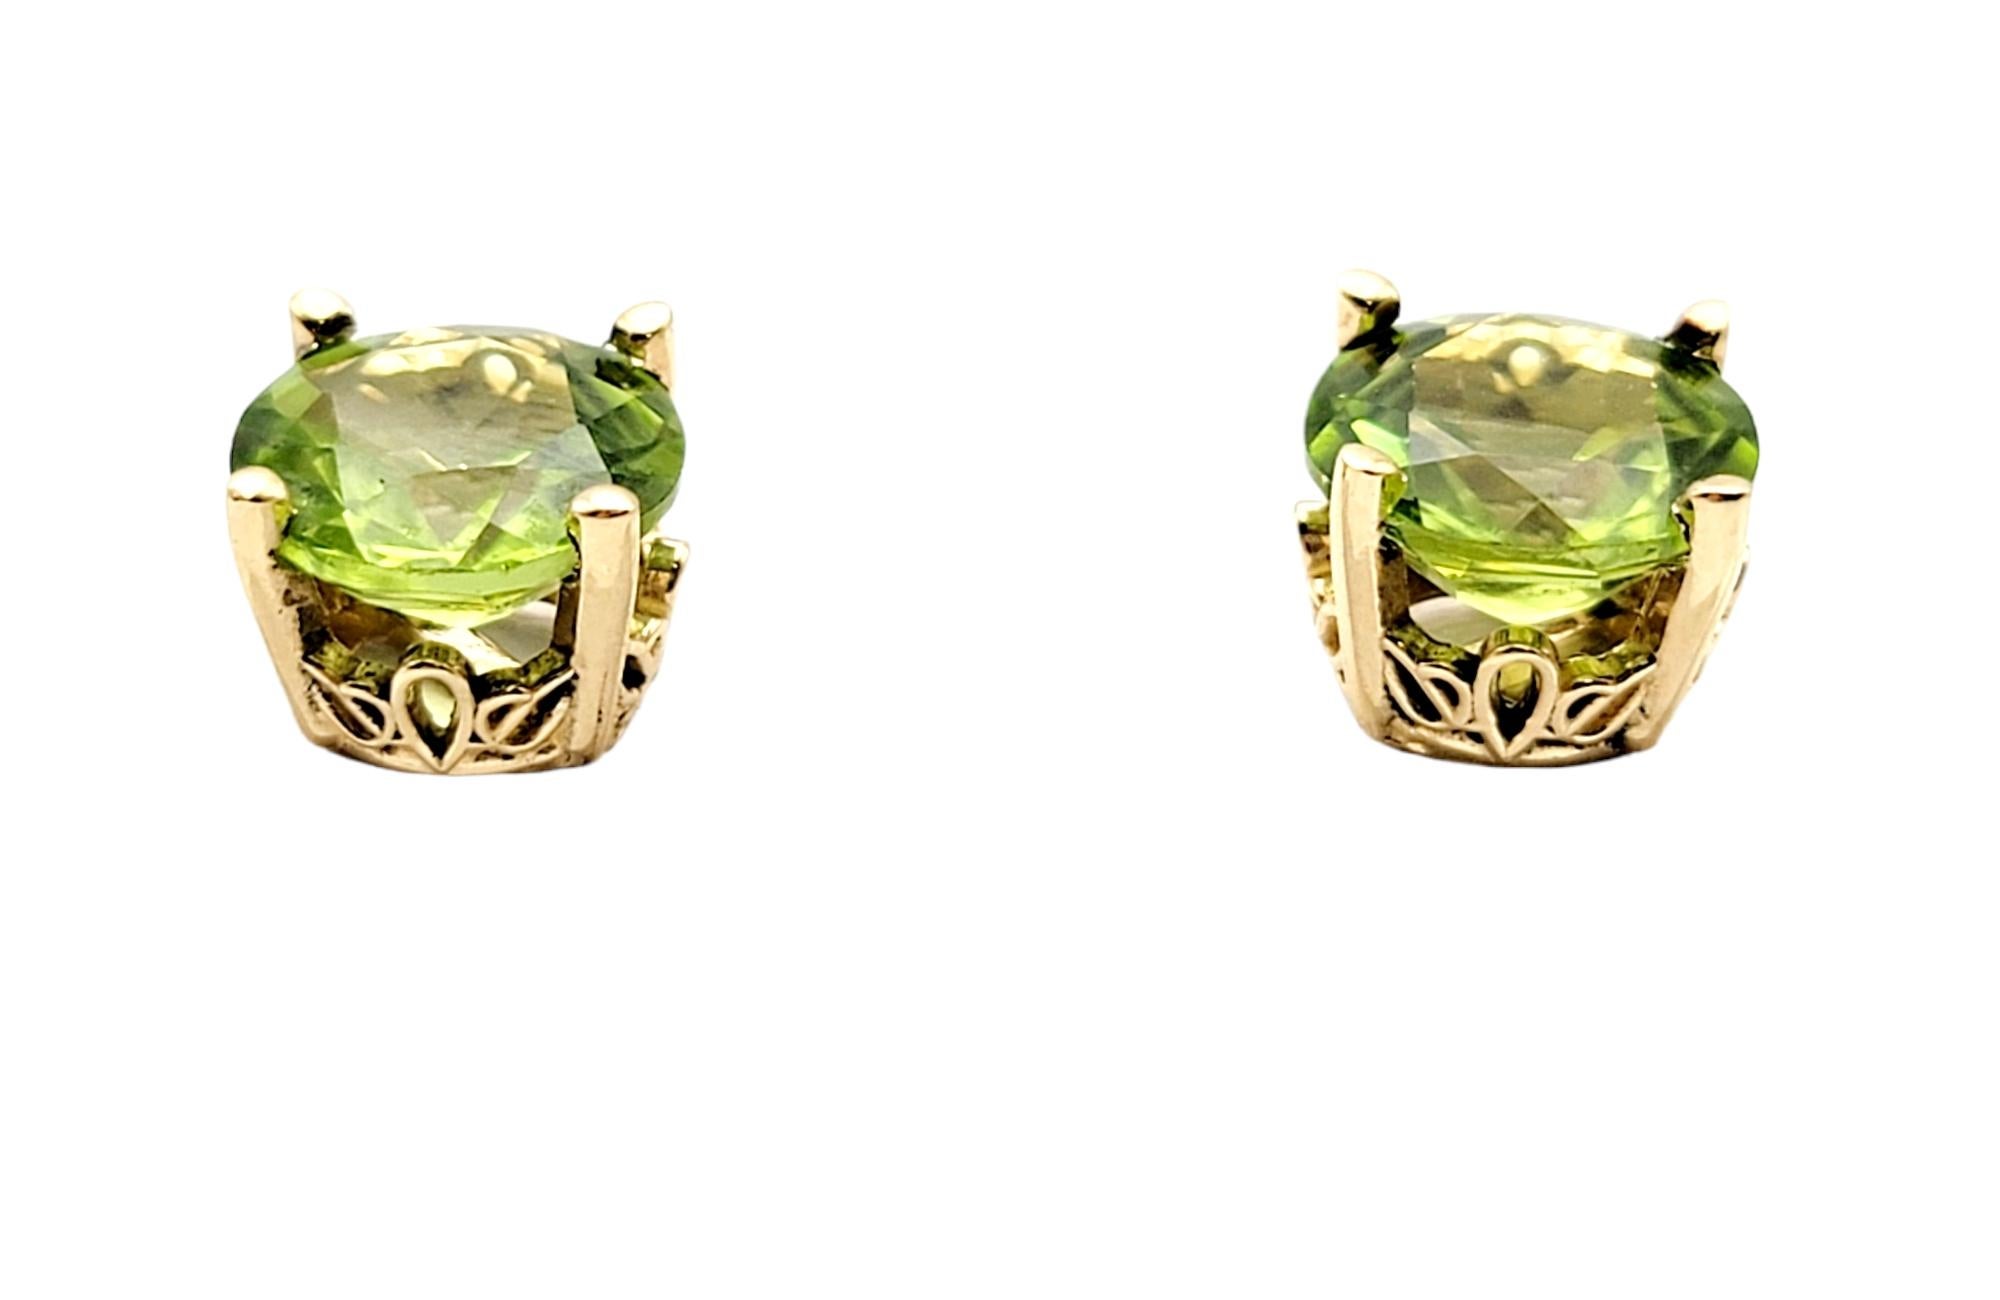 Simple yet timeless peridot solitaire stud earrings. These gorgeous bright yellowish-green peridot and 14 karat yellow gold pierced ear studs are the epitome of minimalist elegance. They give just the right pop of color for everyday wear and the